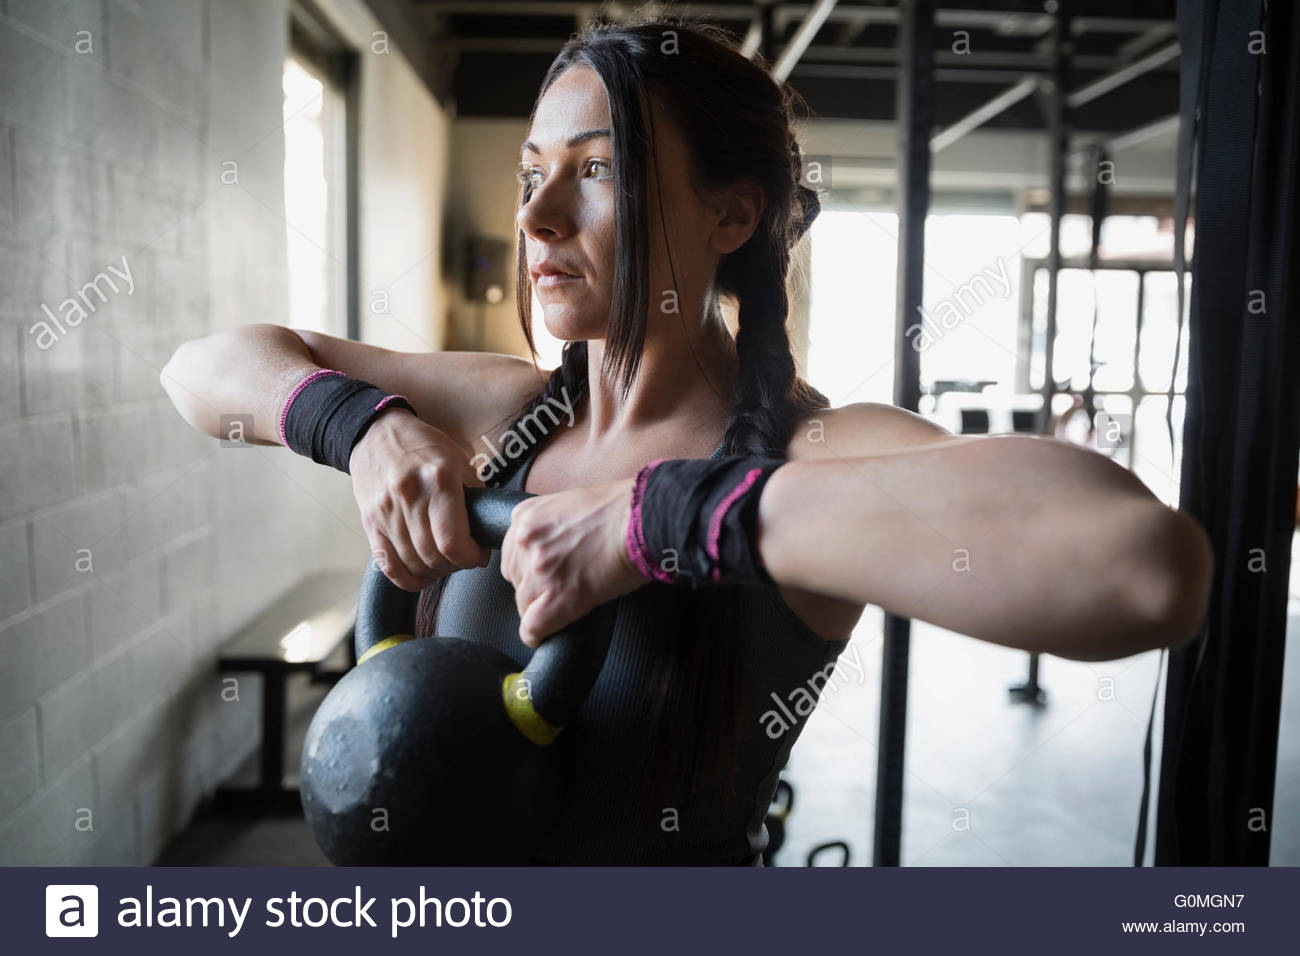 Focused woman weightlifting with kettlebell at gym Stock Photo